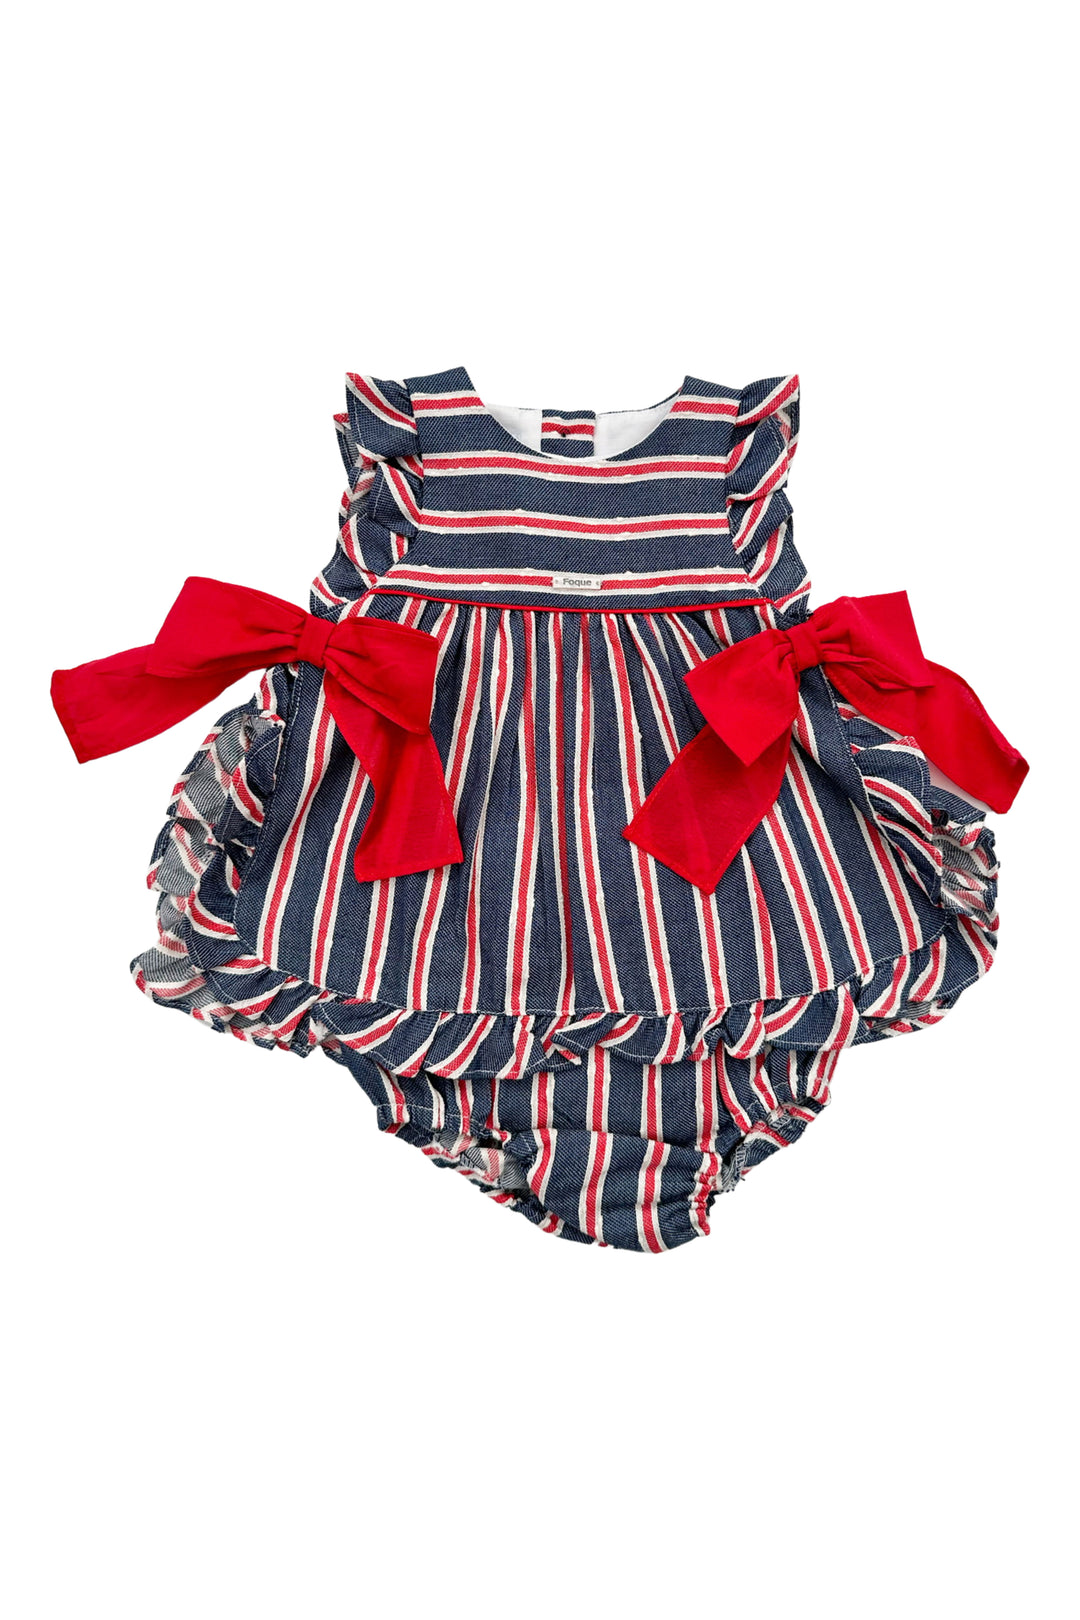 Foque PREORDER "Roma" Navy & Red Striped Dress & Bloomers | iphoneandroidapplications